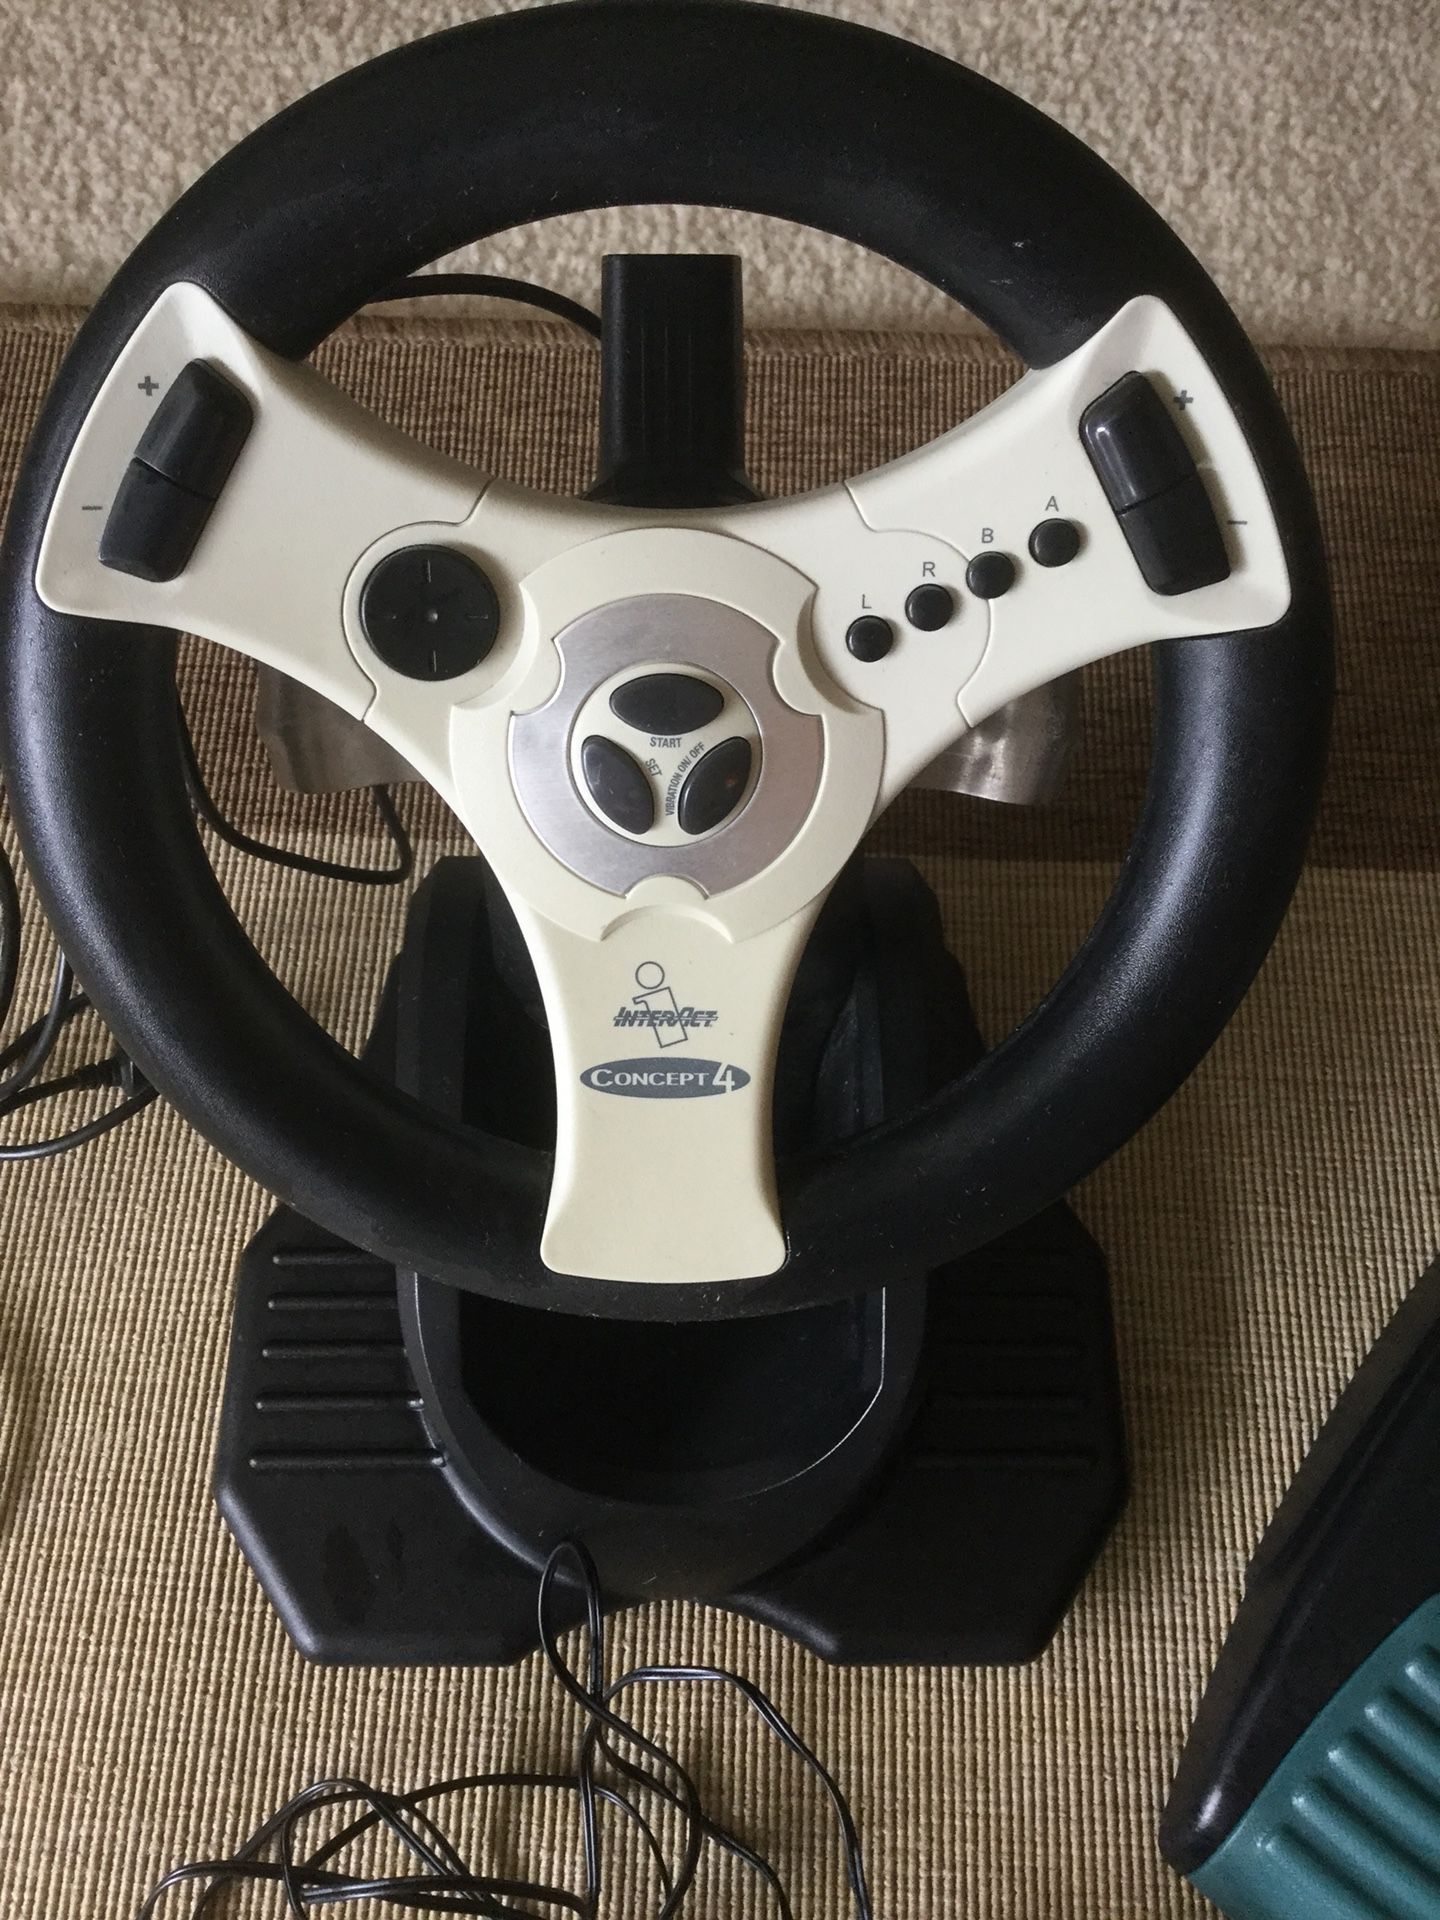 Dreamcast analog powered-steering wheel/ Great for Dreamcast racing simulators force resistance 🏎🏎 😁🎧